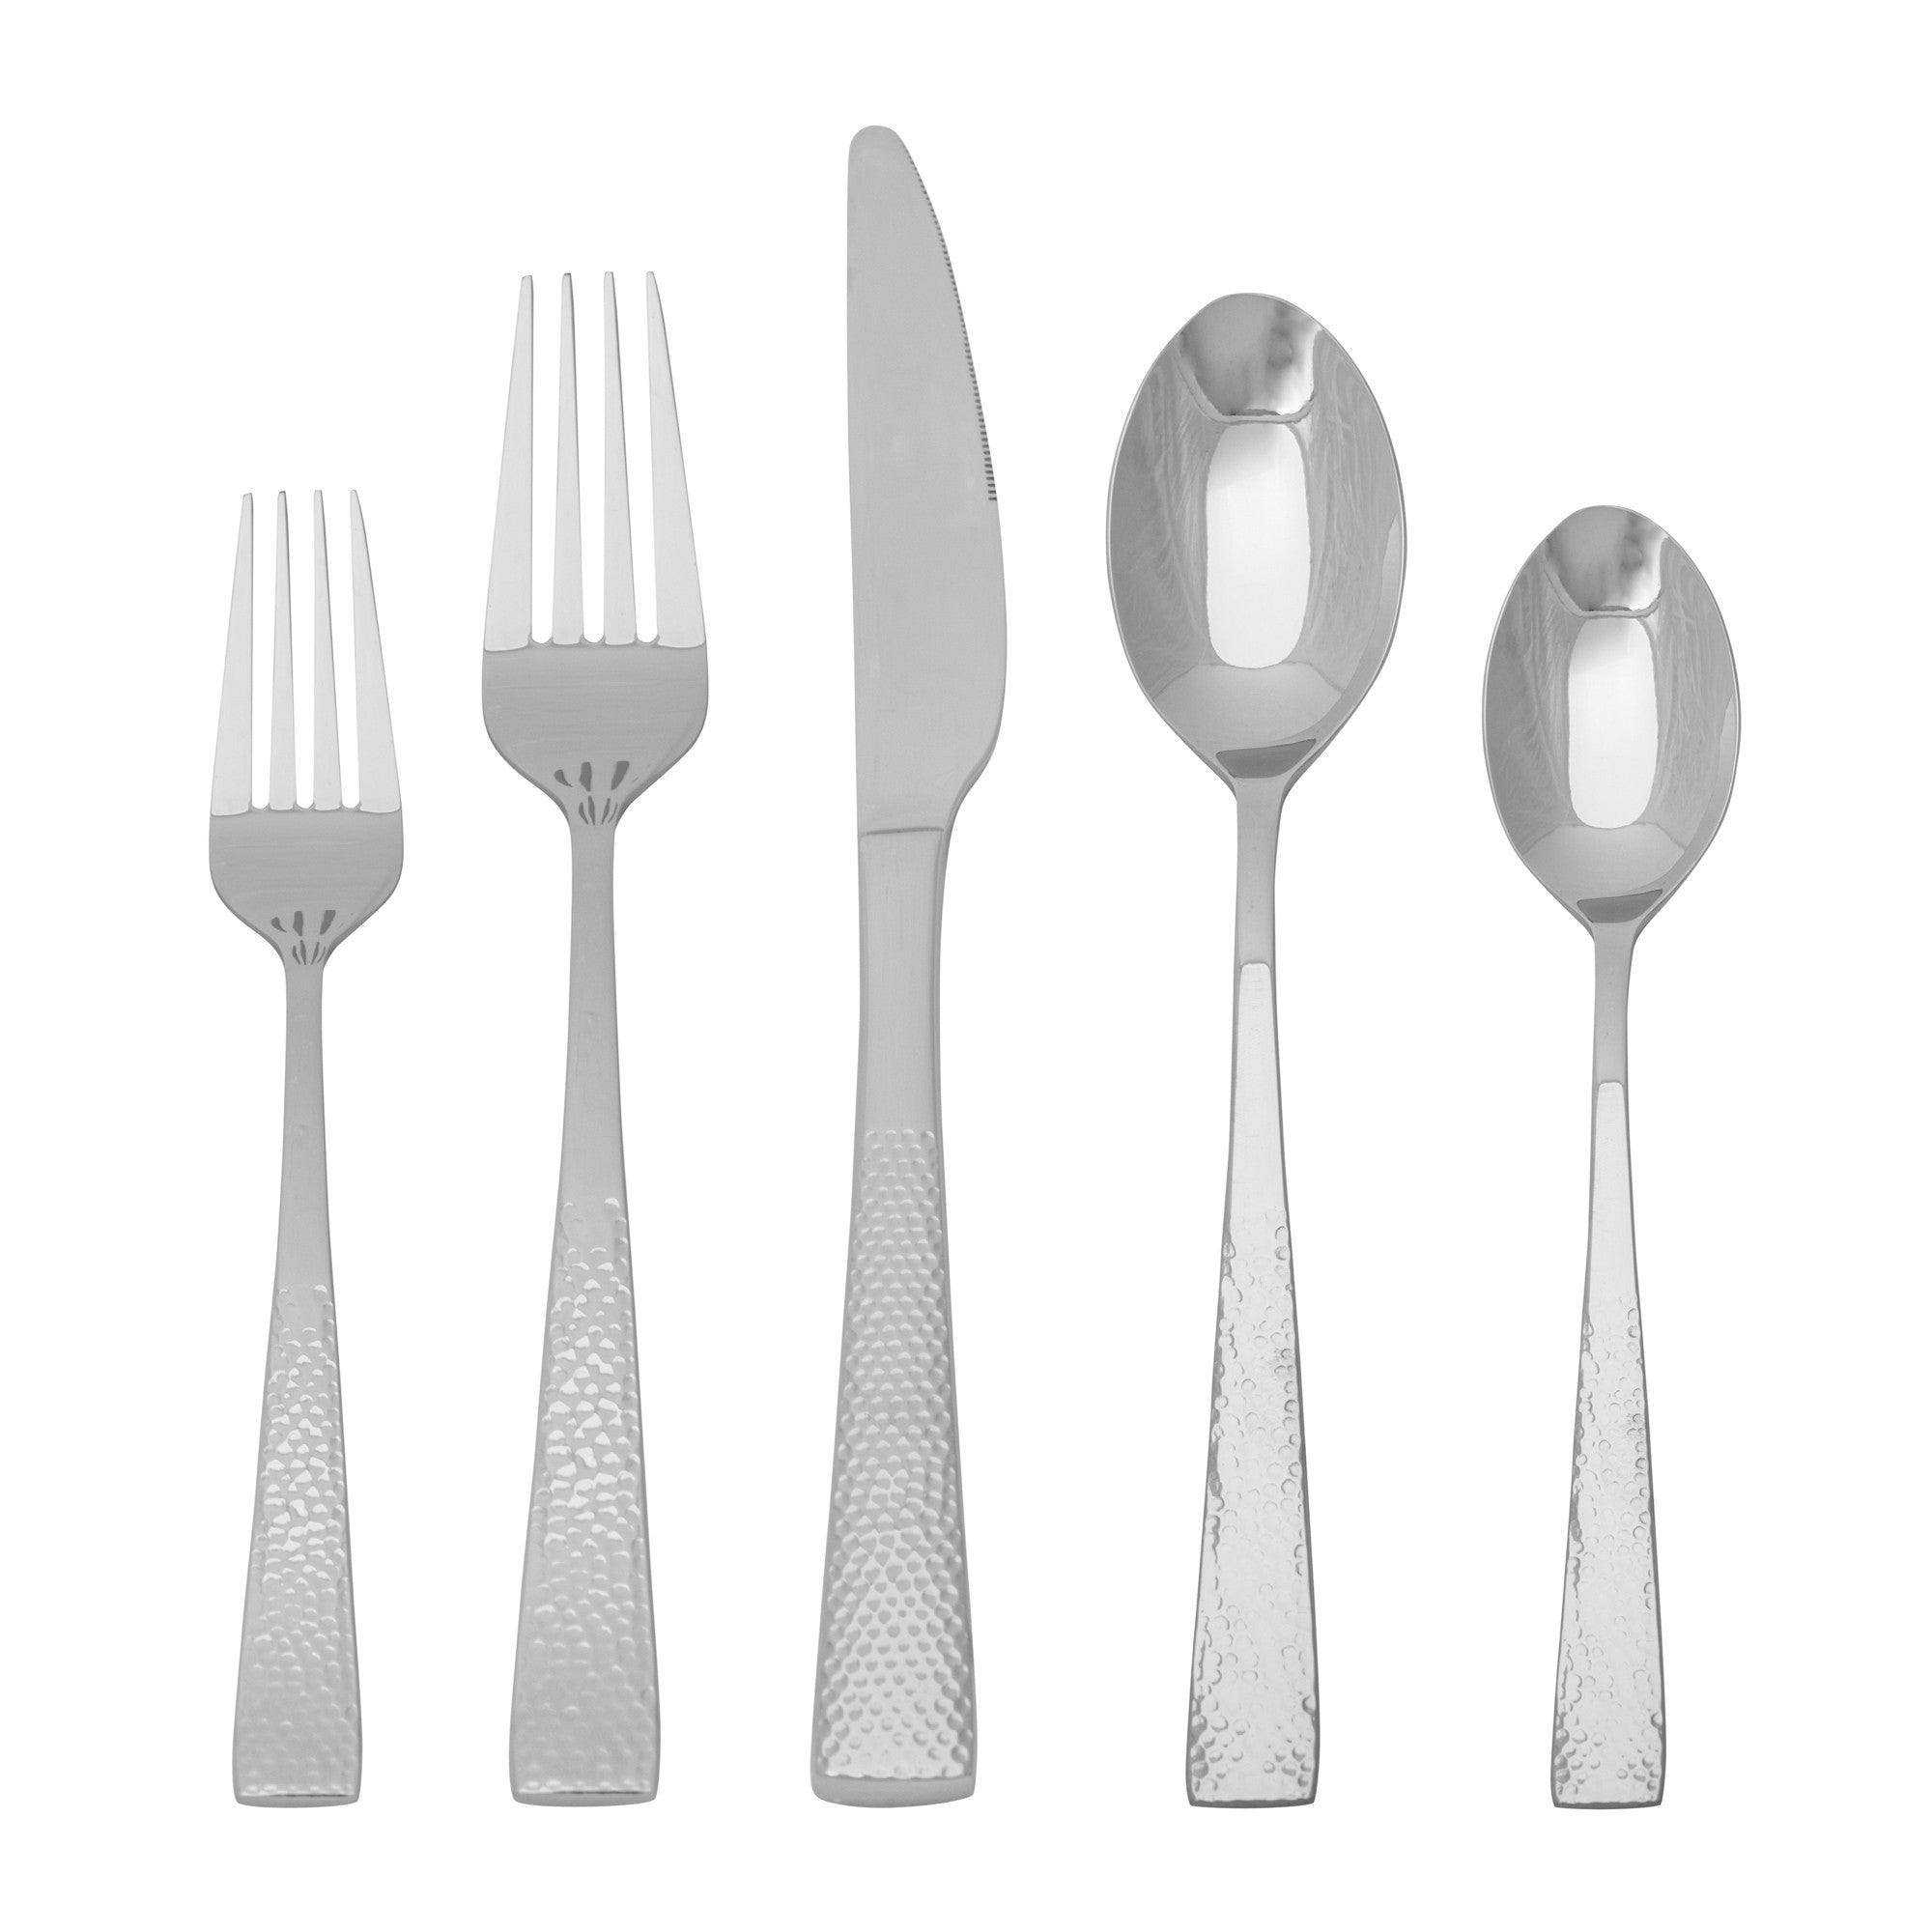 title:Safdie & Co. Flatware Stainless Steel 20PC Set Sonoma;color:Silver